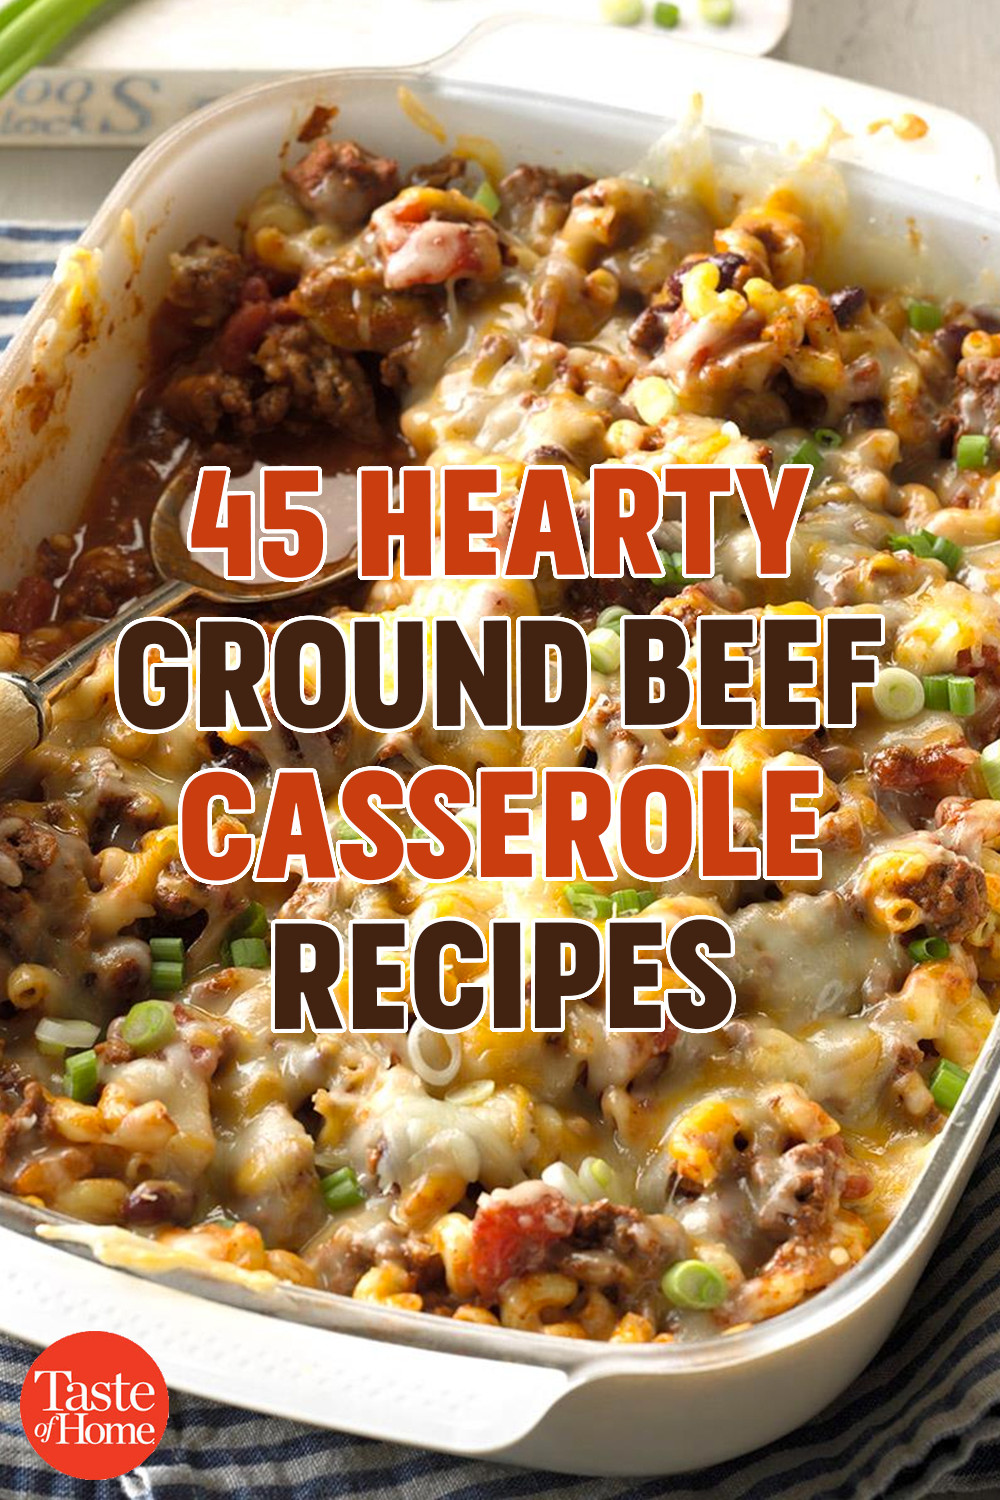 Healthy Casseroles With Ground Beef
 45 Hearty Ground Beef Casseroles With images